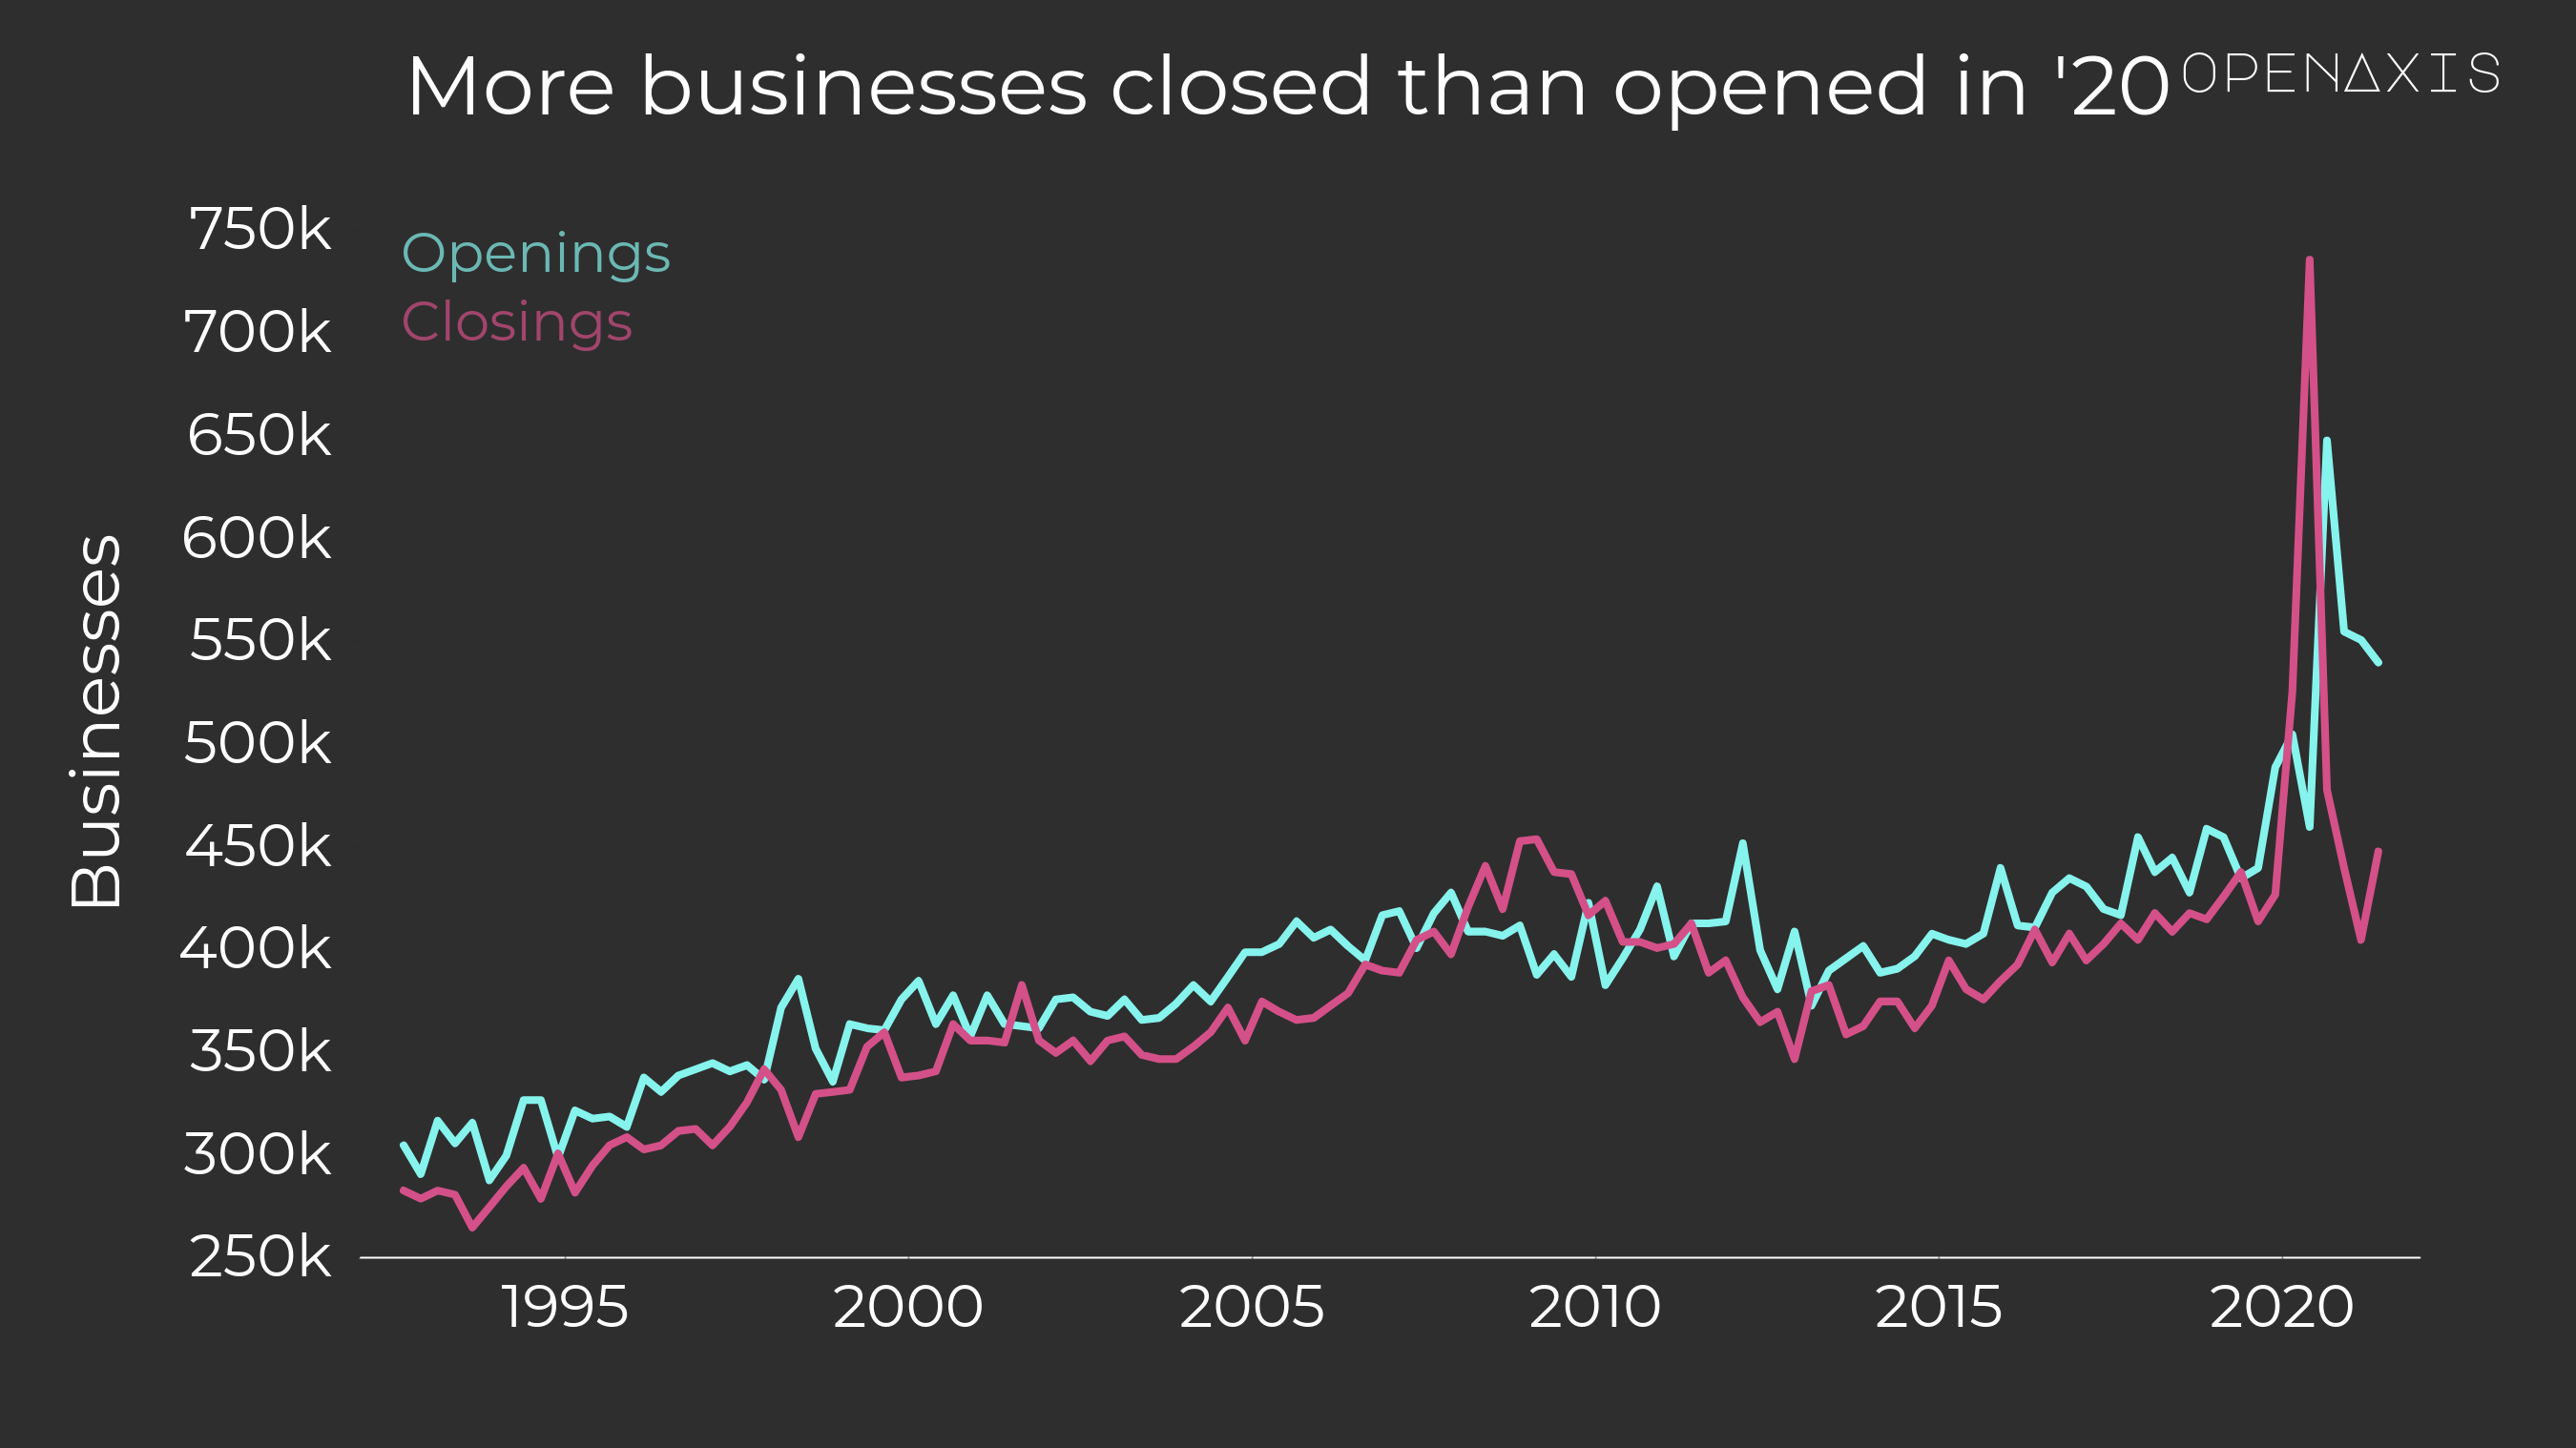 "More businesses closed than opened in '20"